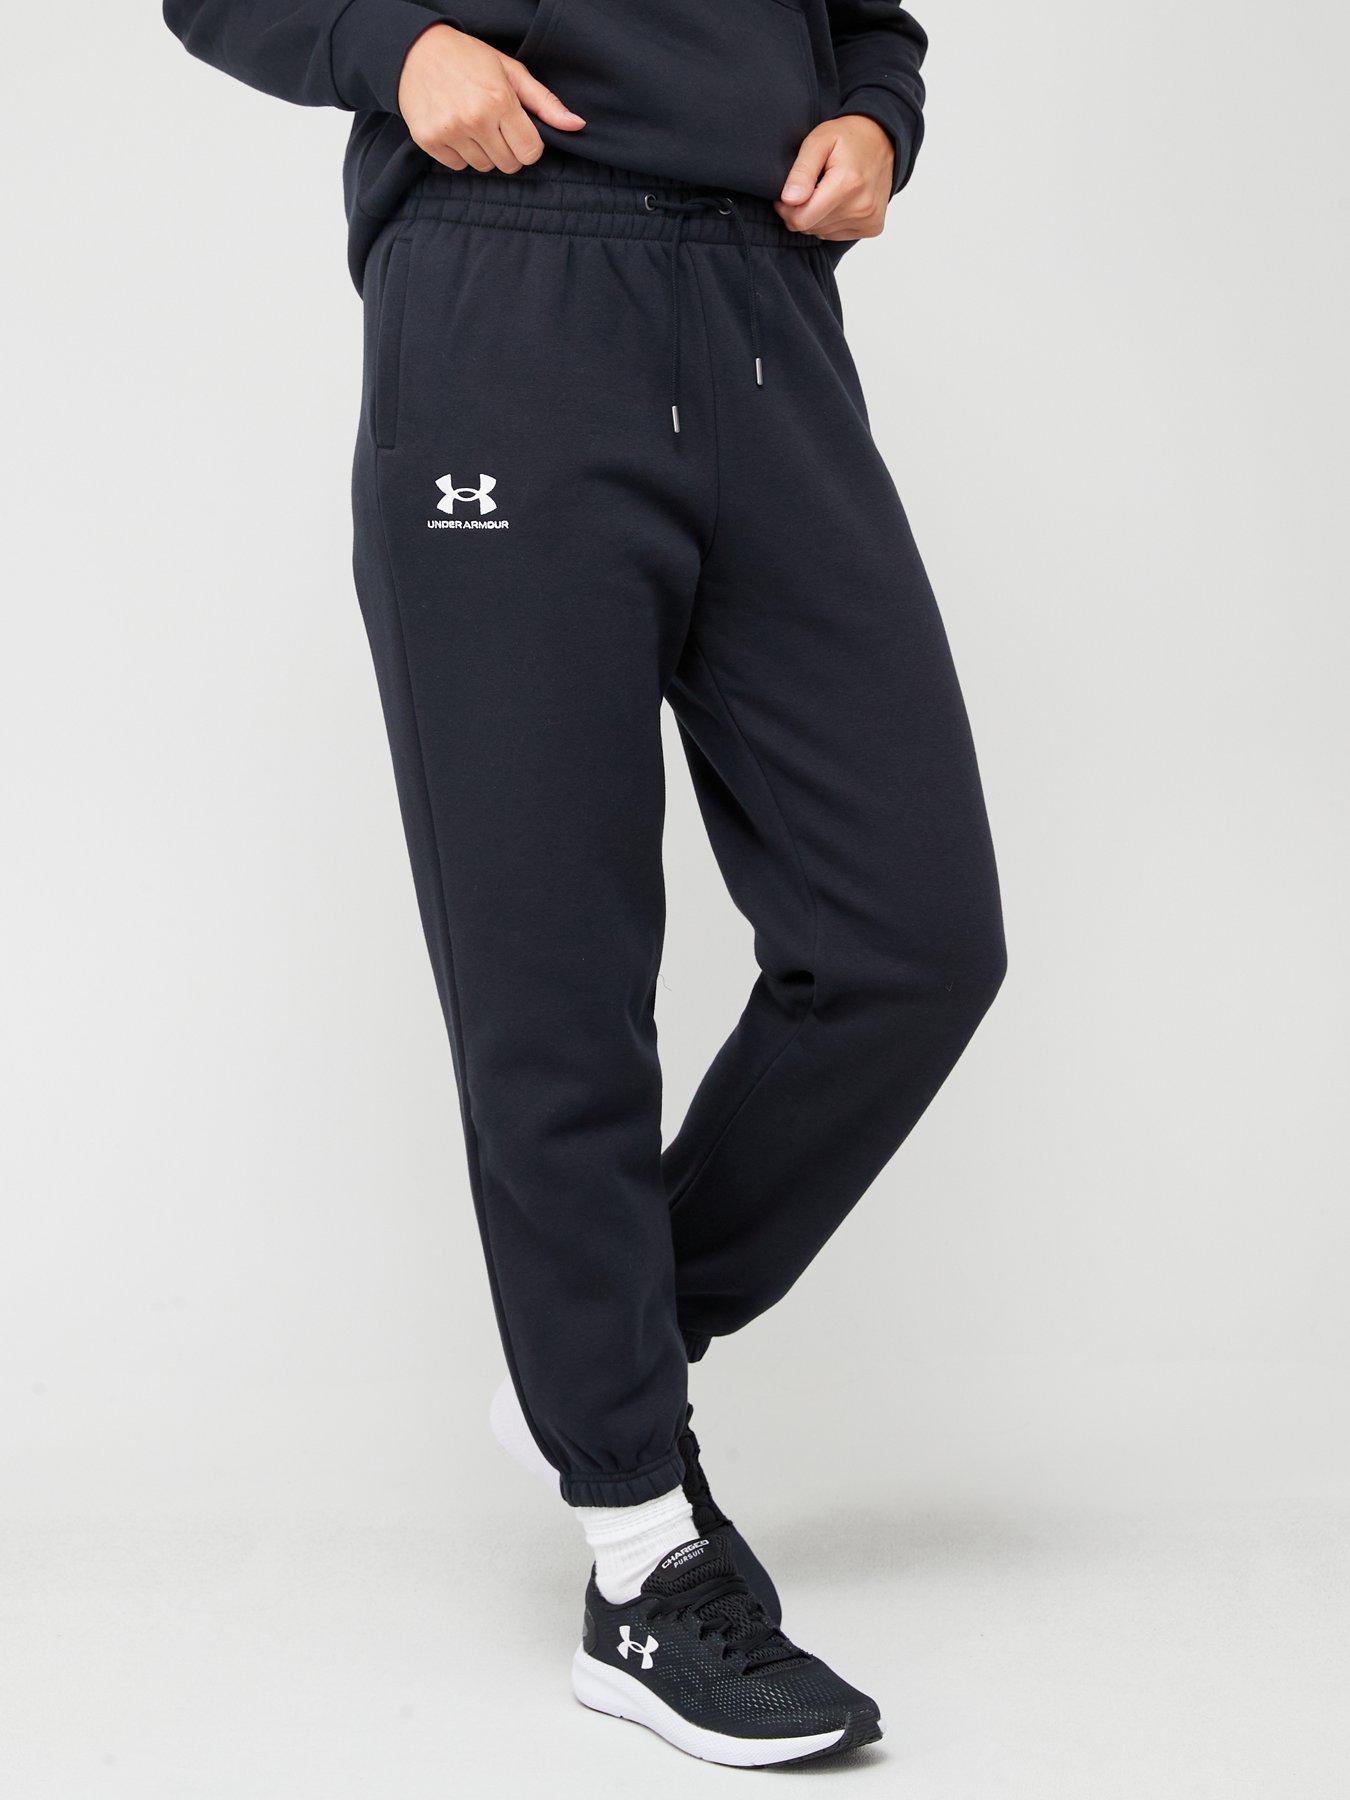 Under Armour, Pants & Jumpsuits, Under Armour Athletic Pants Black  Stretch White Stripe Mesh Pockets Extra Large